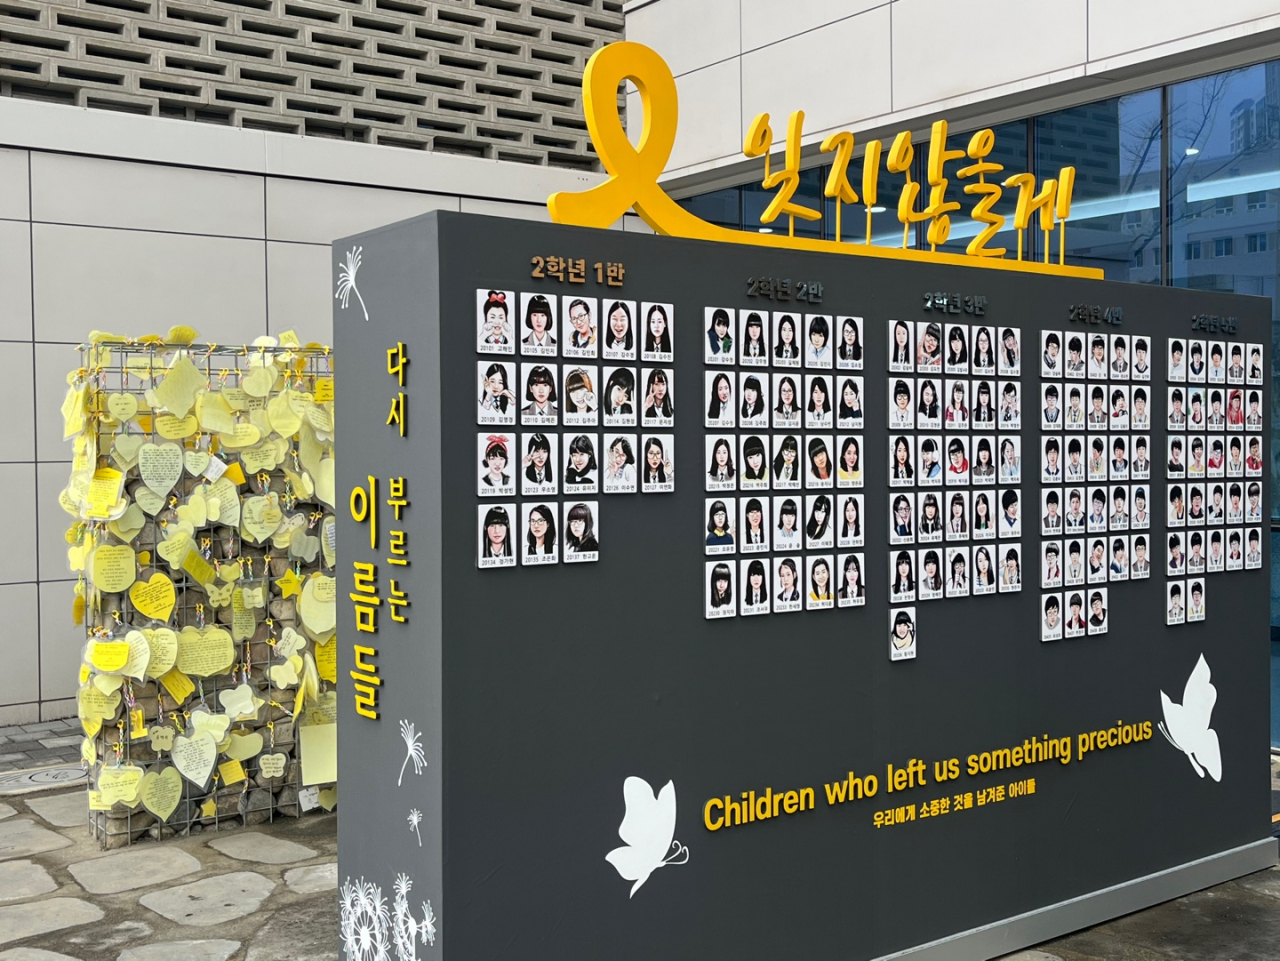 Messages are written on yellow ribbons and cards displayed on walls outside a Sewol ferry memorial site in Ansan, Gyeonggi Province. (Lee Jaeeun/The Korea Herald)